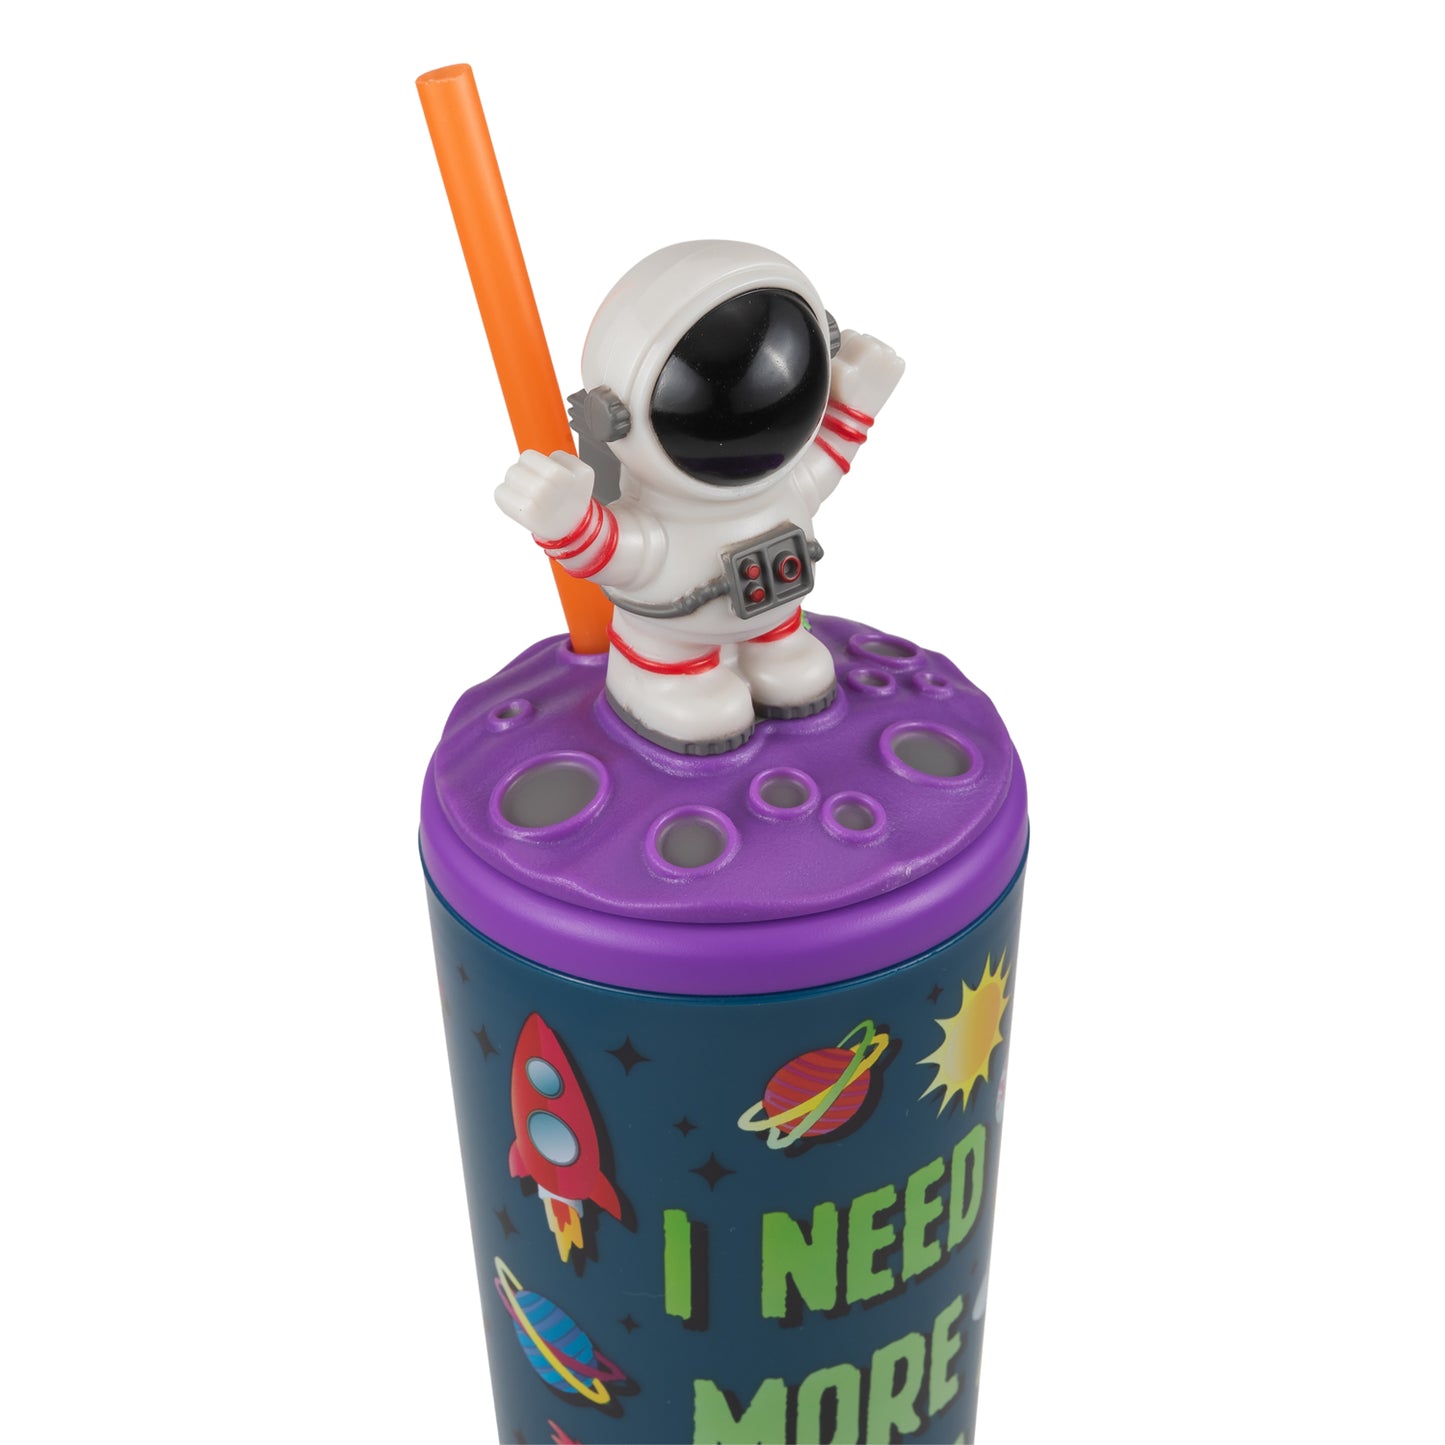 Cool Gear 4-Pack 18 oz Fun Toppers Astronaut Character Lid Tumblers with straw included | Durable, Reusable Water Bottle Gift for Kids, Adults